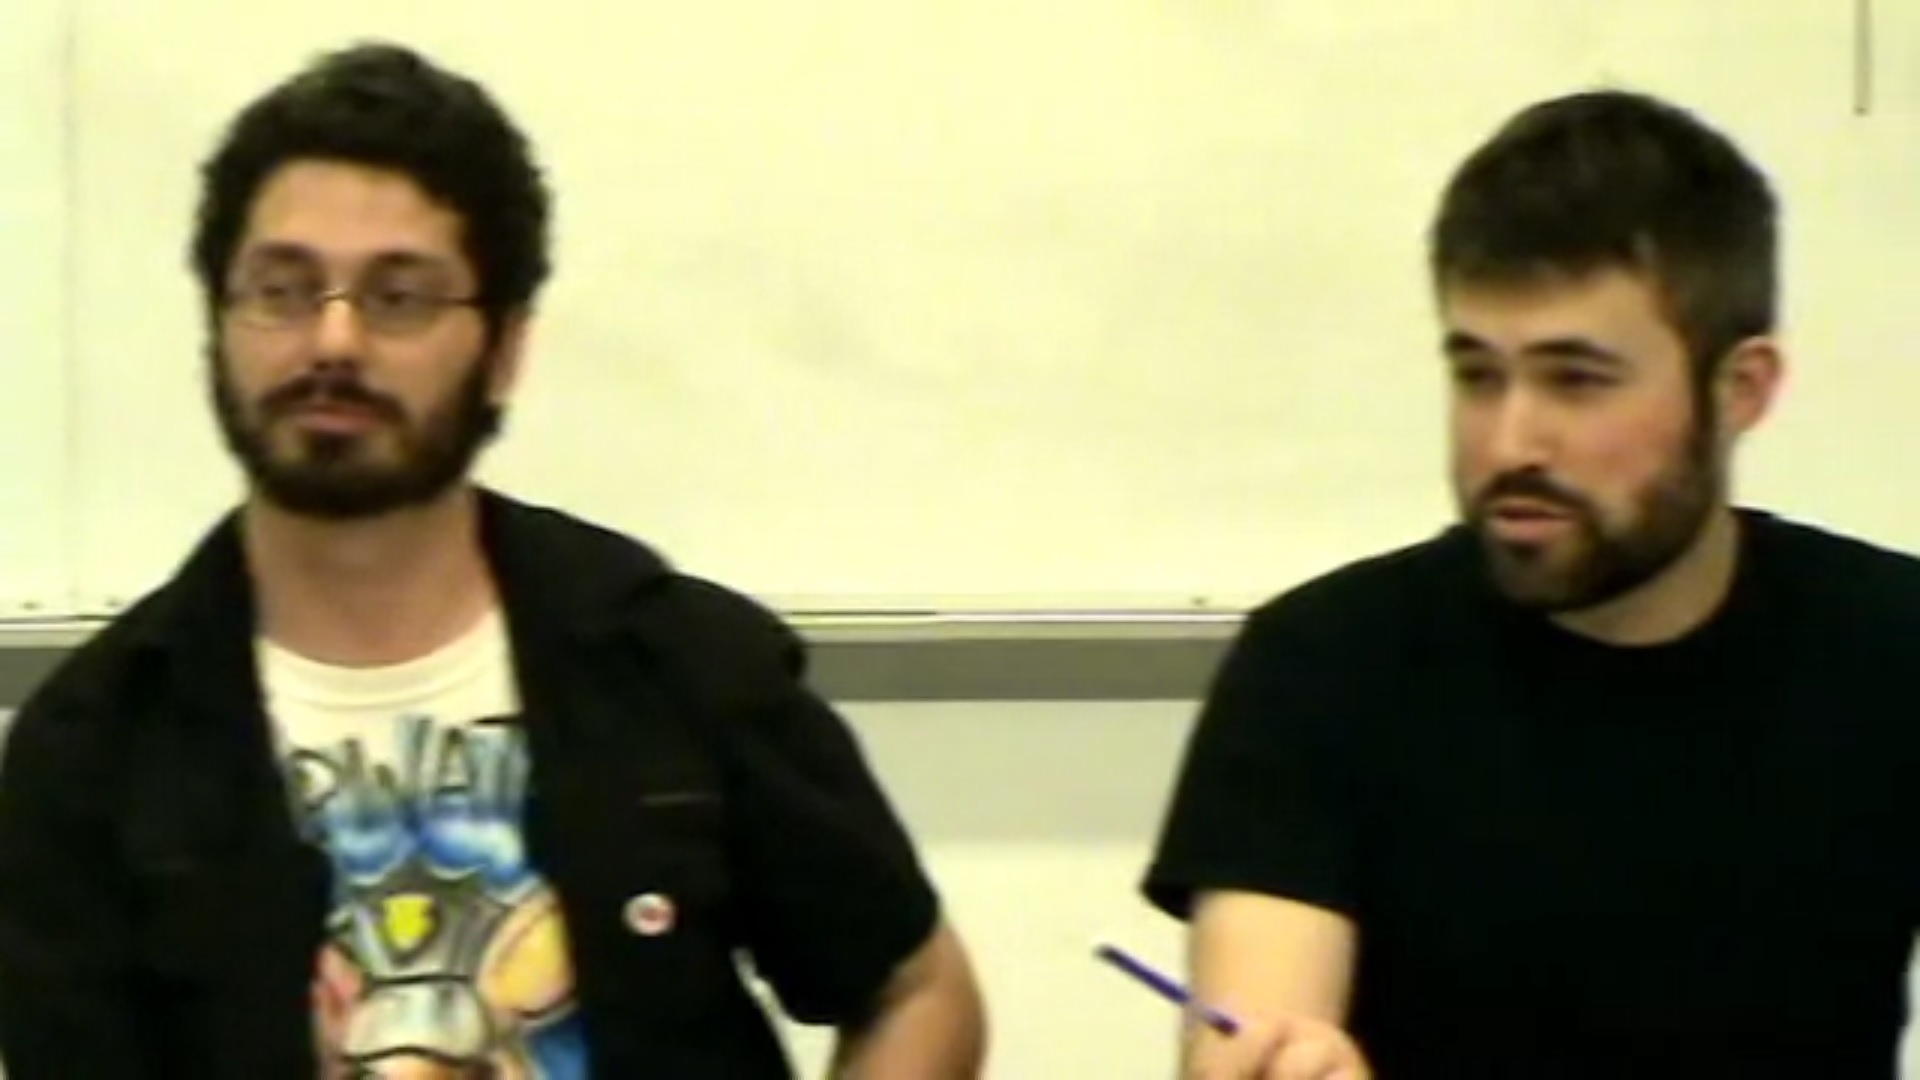 Jose Alcoff (left) and Mark Bray (right) at Left Forum 2015. Alcoff was introduced as "Jose Martin," and a member of the audience identified him as "Chepe" during the question-and-answer session. (Screenshot/YouTube)